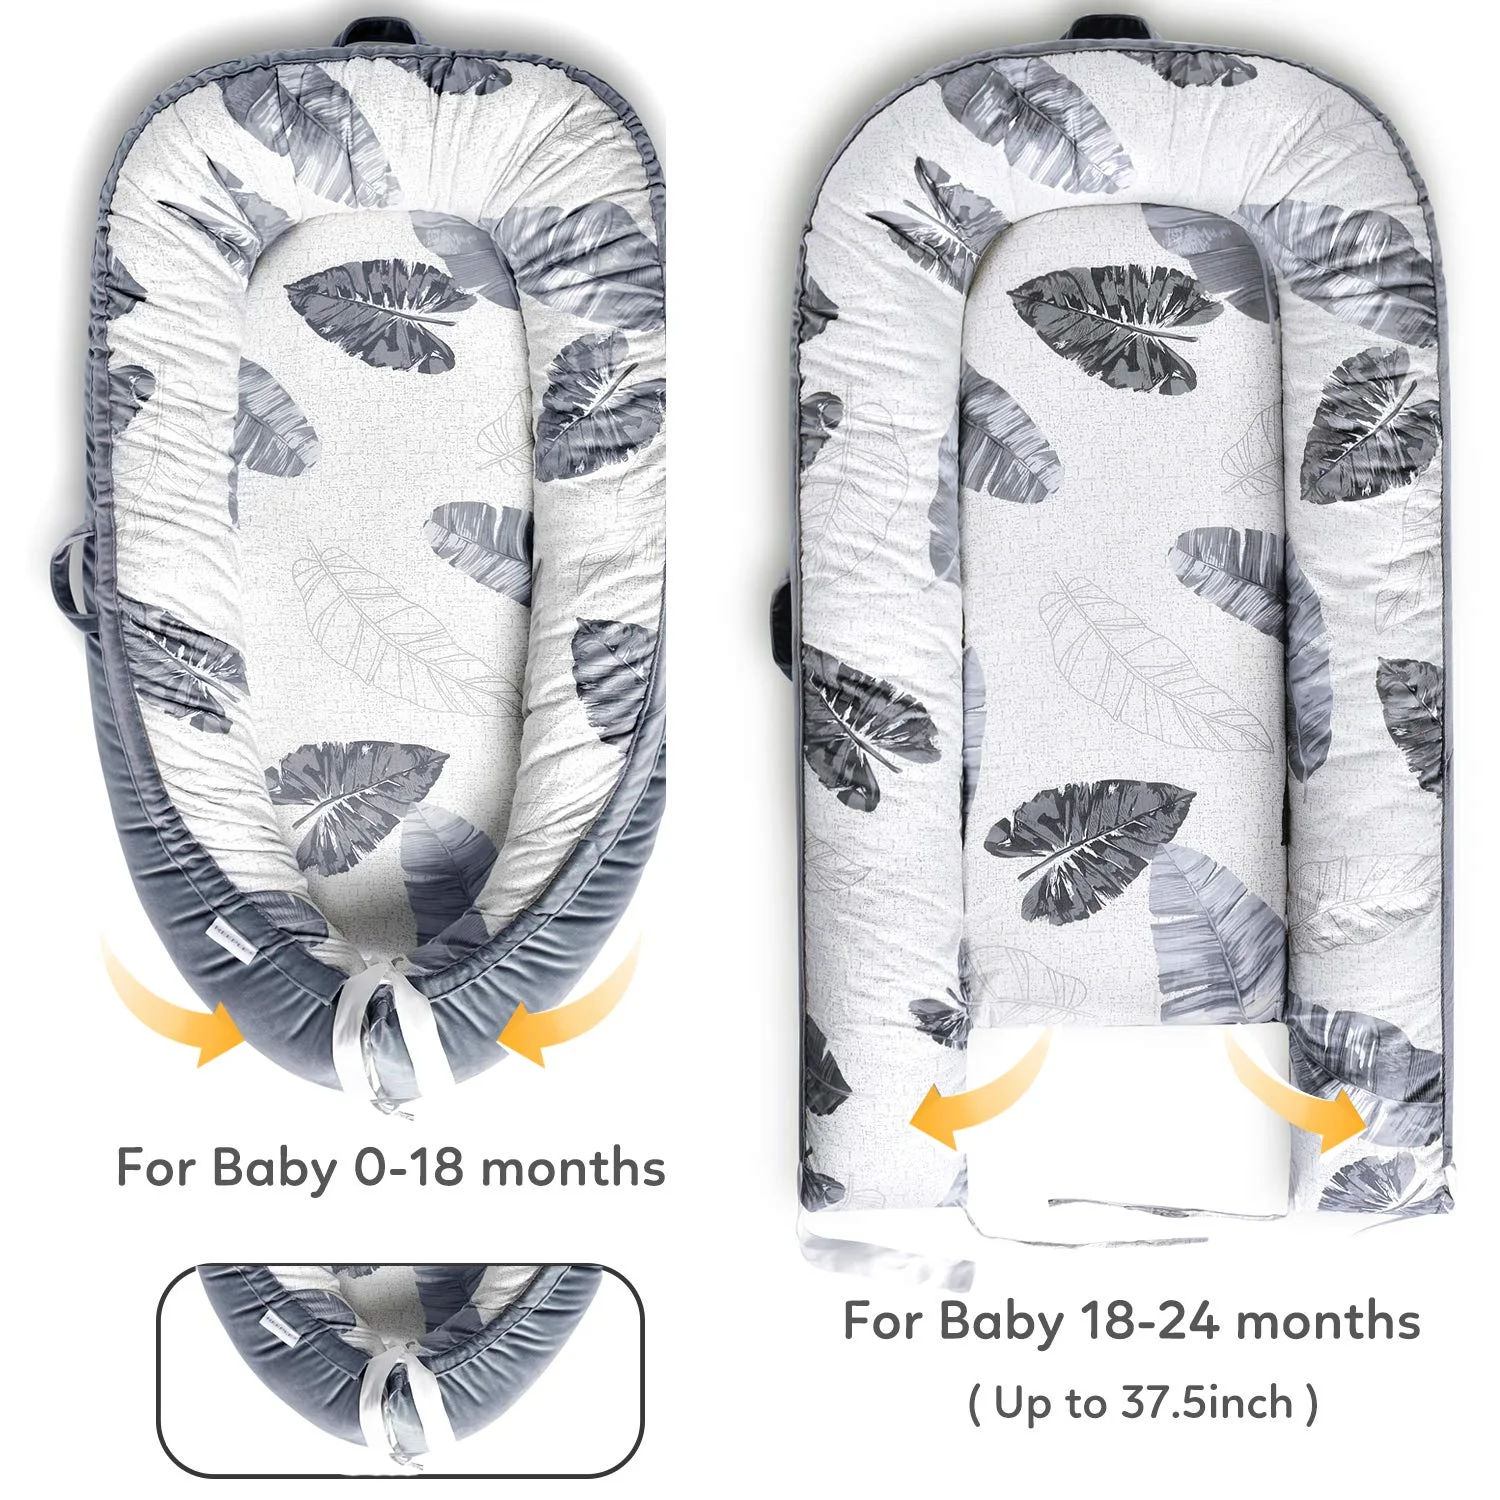 Baby Lounger Baby Nest for Bedroom Portable Infant Bassinet Nest for Co-Sleep Removable Cover Baby Bionic Bed Cotton Fabric